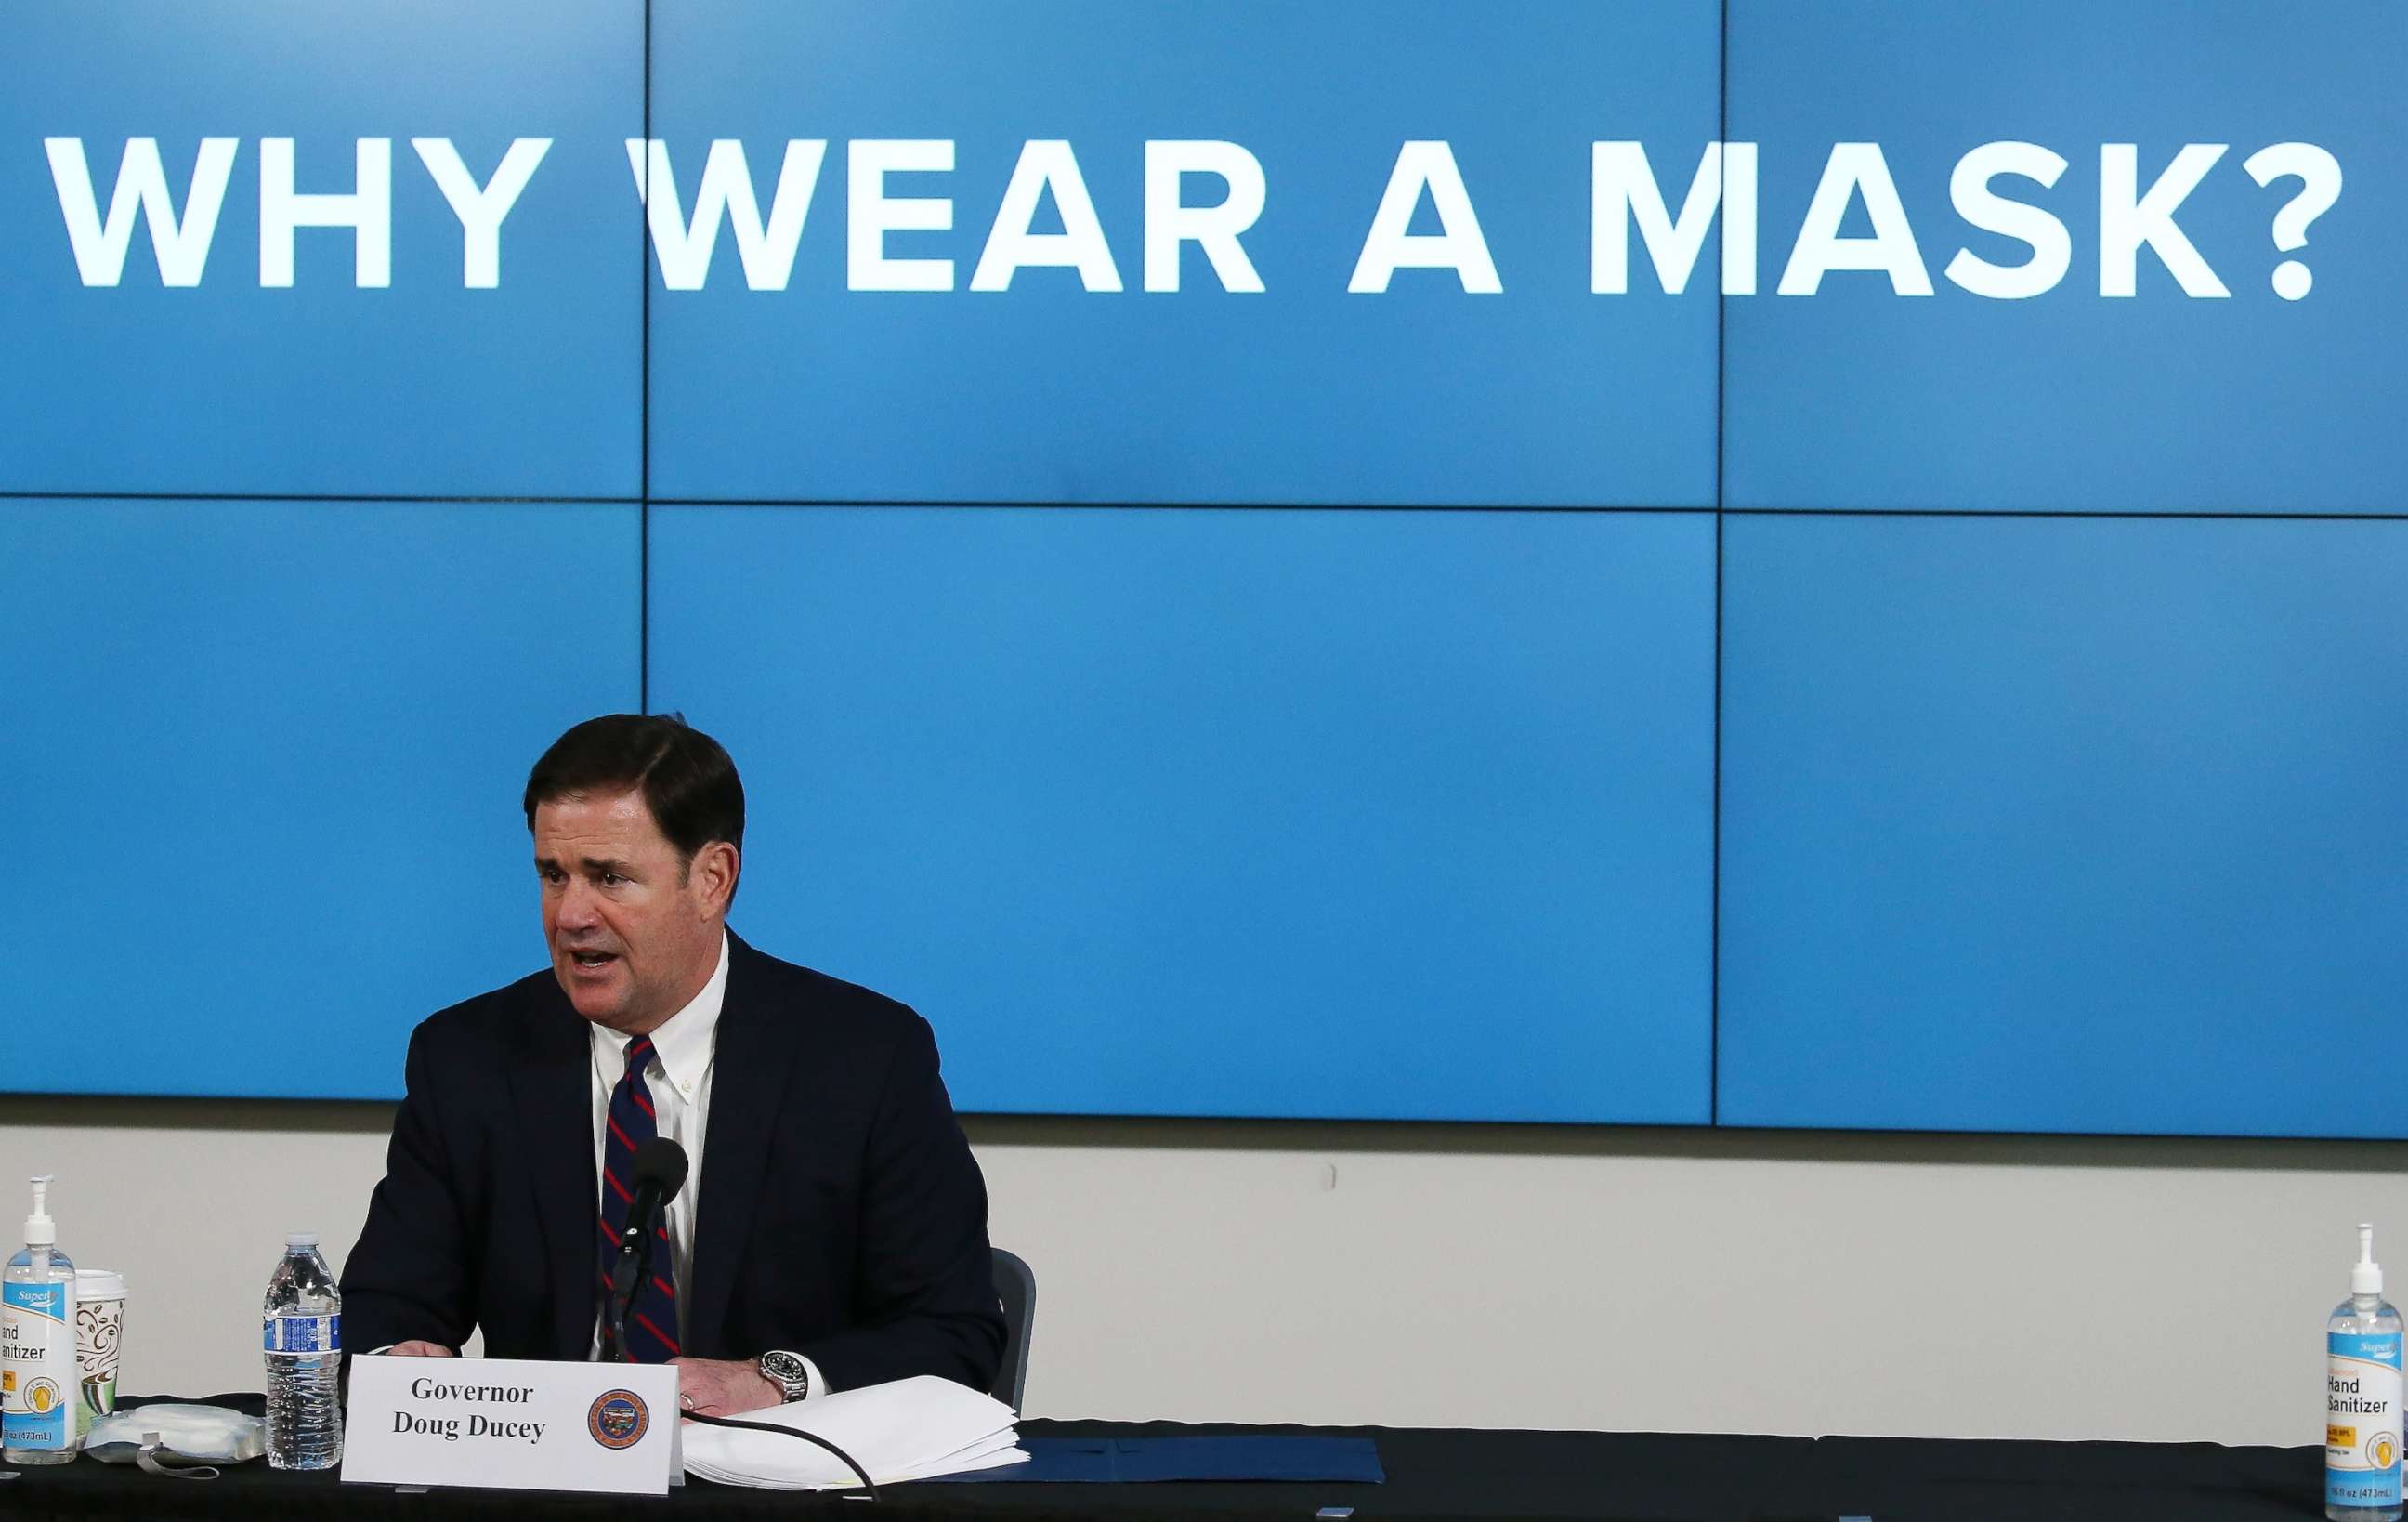 PHOTO: In this Thursday, July 9, 2020, photo, Arizona Republican Gov. Doug Ducey speaks about the latest coronavirus update in Arizona and benefits of wearing a mask during a news conference in Phoenix. 